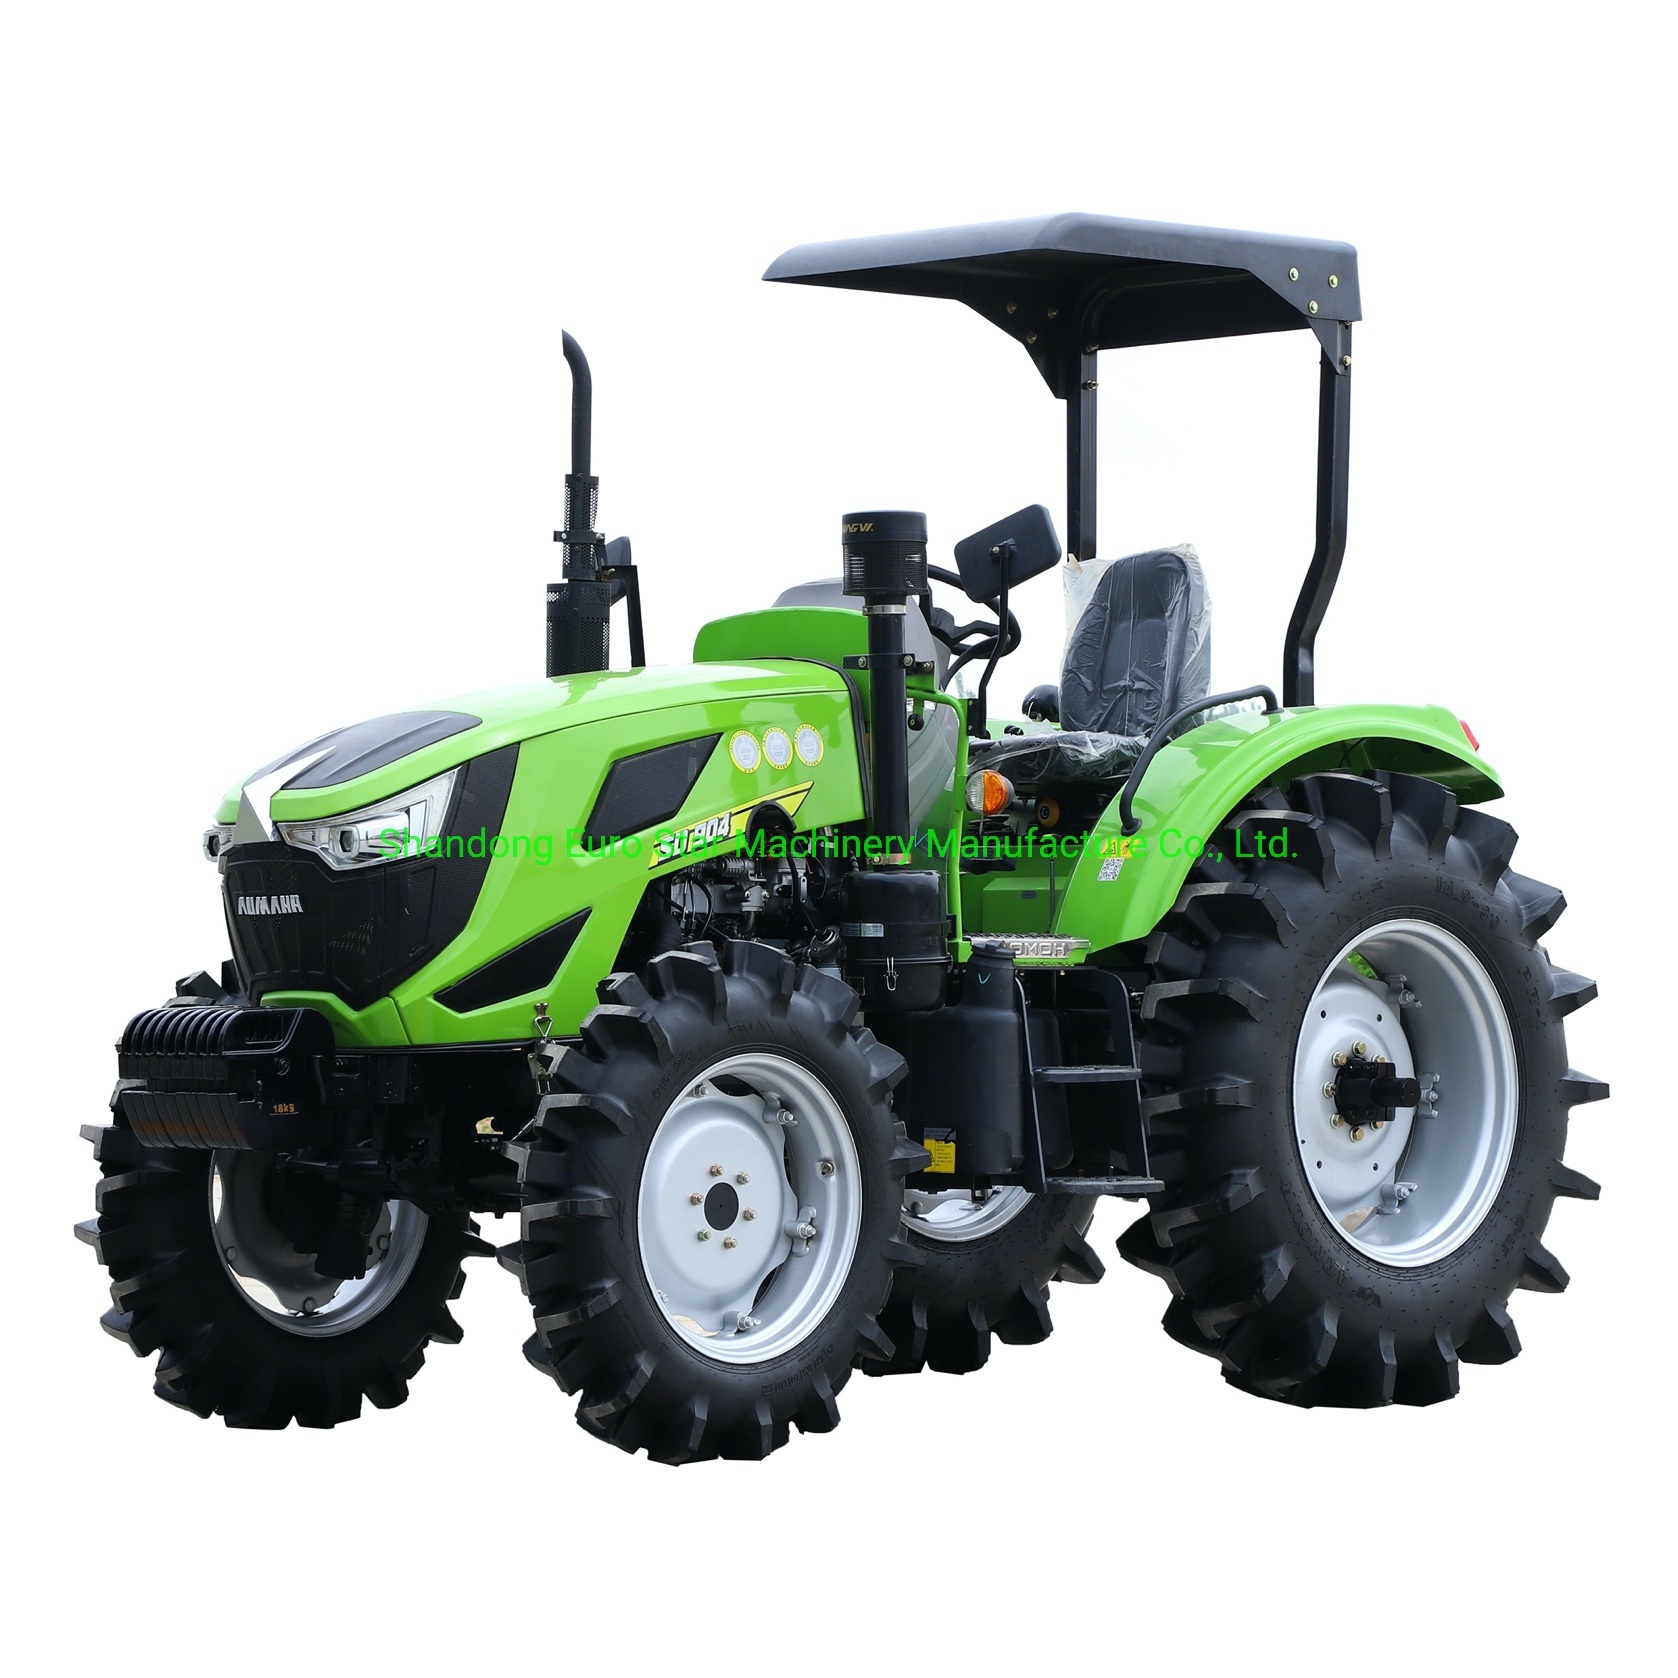 B-4WD-60HP-Wheel-Tractor-Mini-Orchard-Small-Four-Farm-Crawler-Paddy-Lawn-Big-Garden-Walking-Diesel-China-Tractor-for-Agricultural-Machinery-Machine-Es6048b-CE.jpg